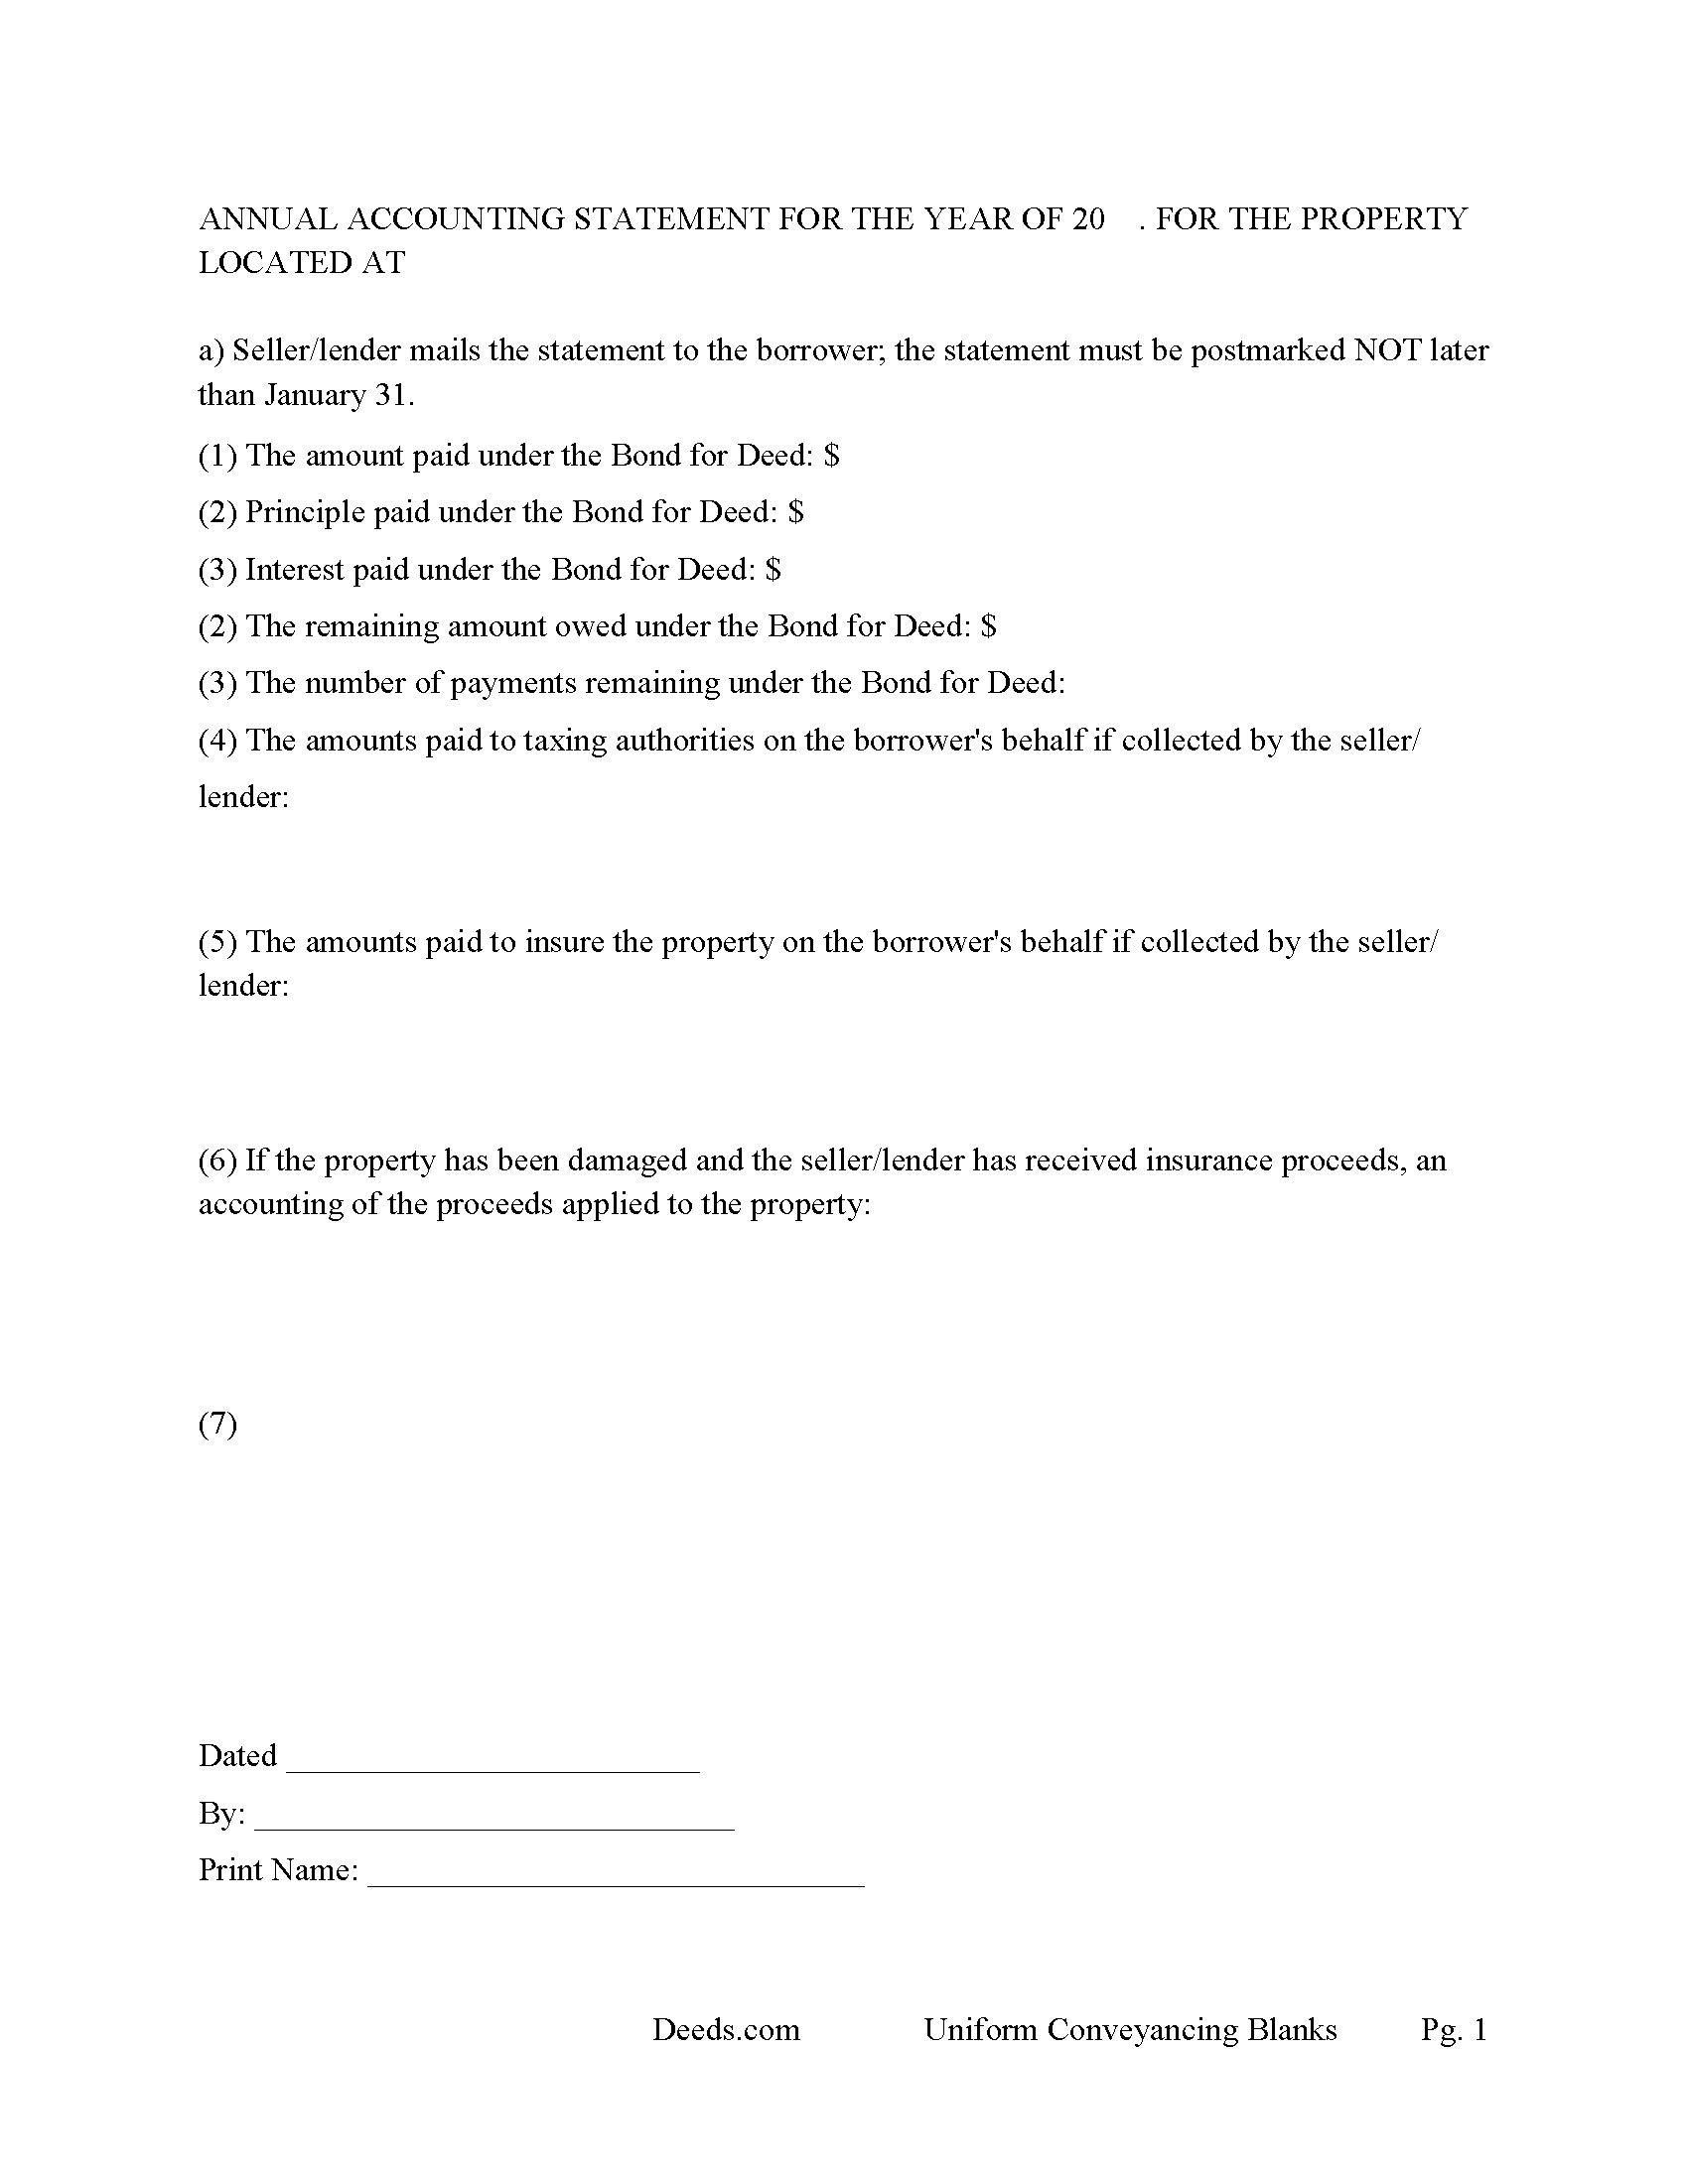 Lauderdale County Annual Accounting Statement Form